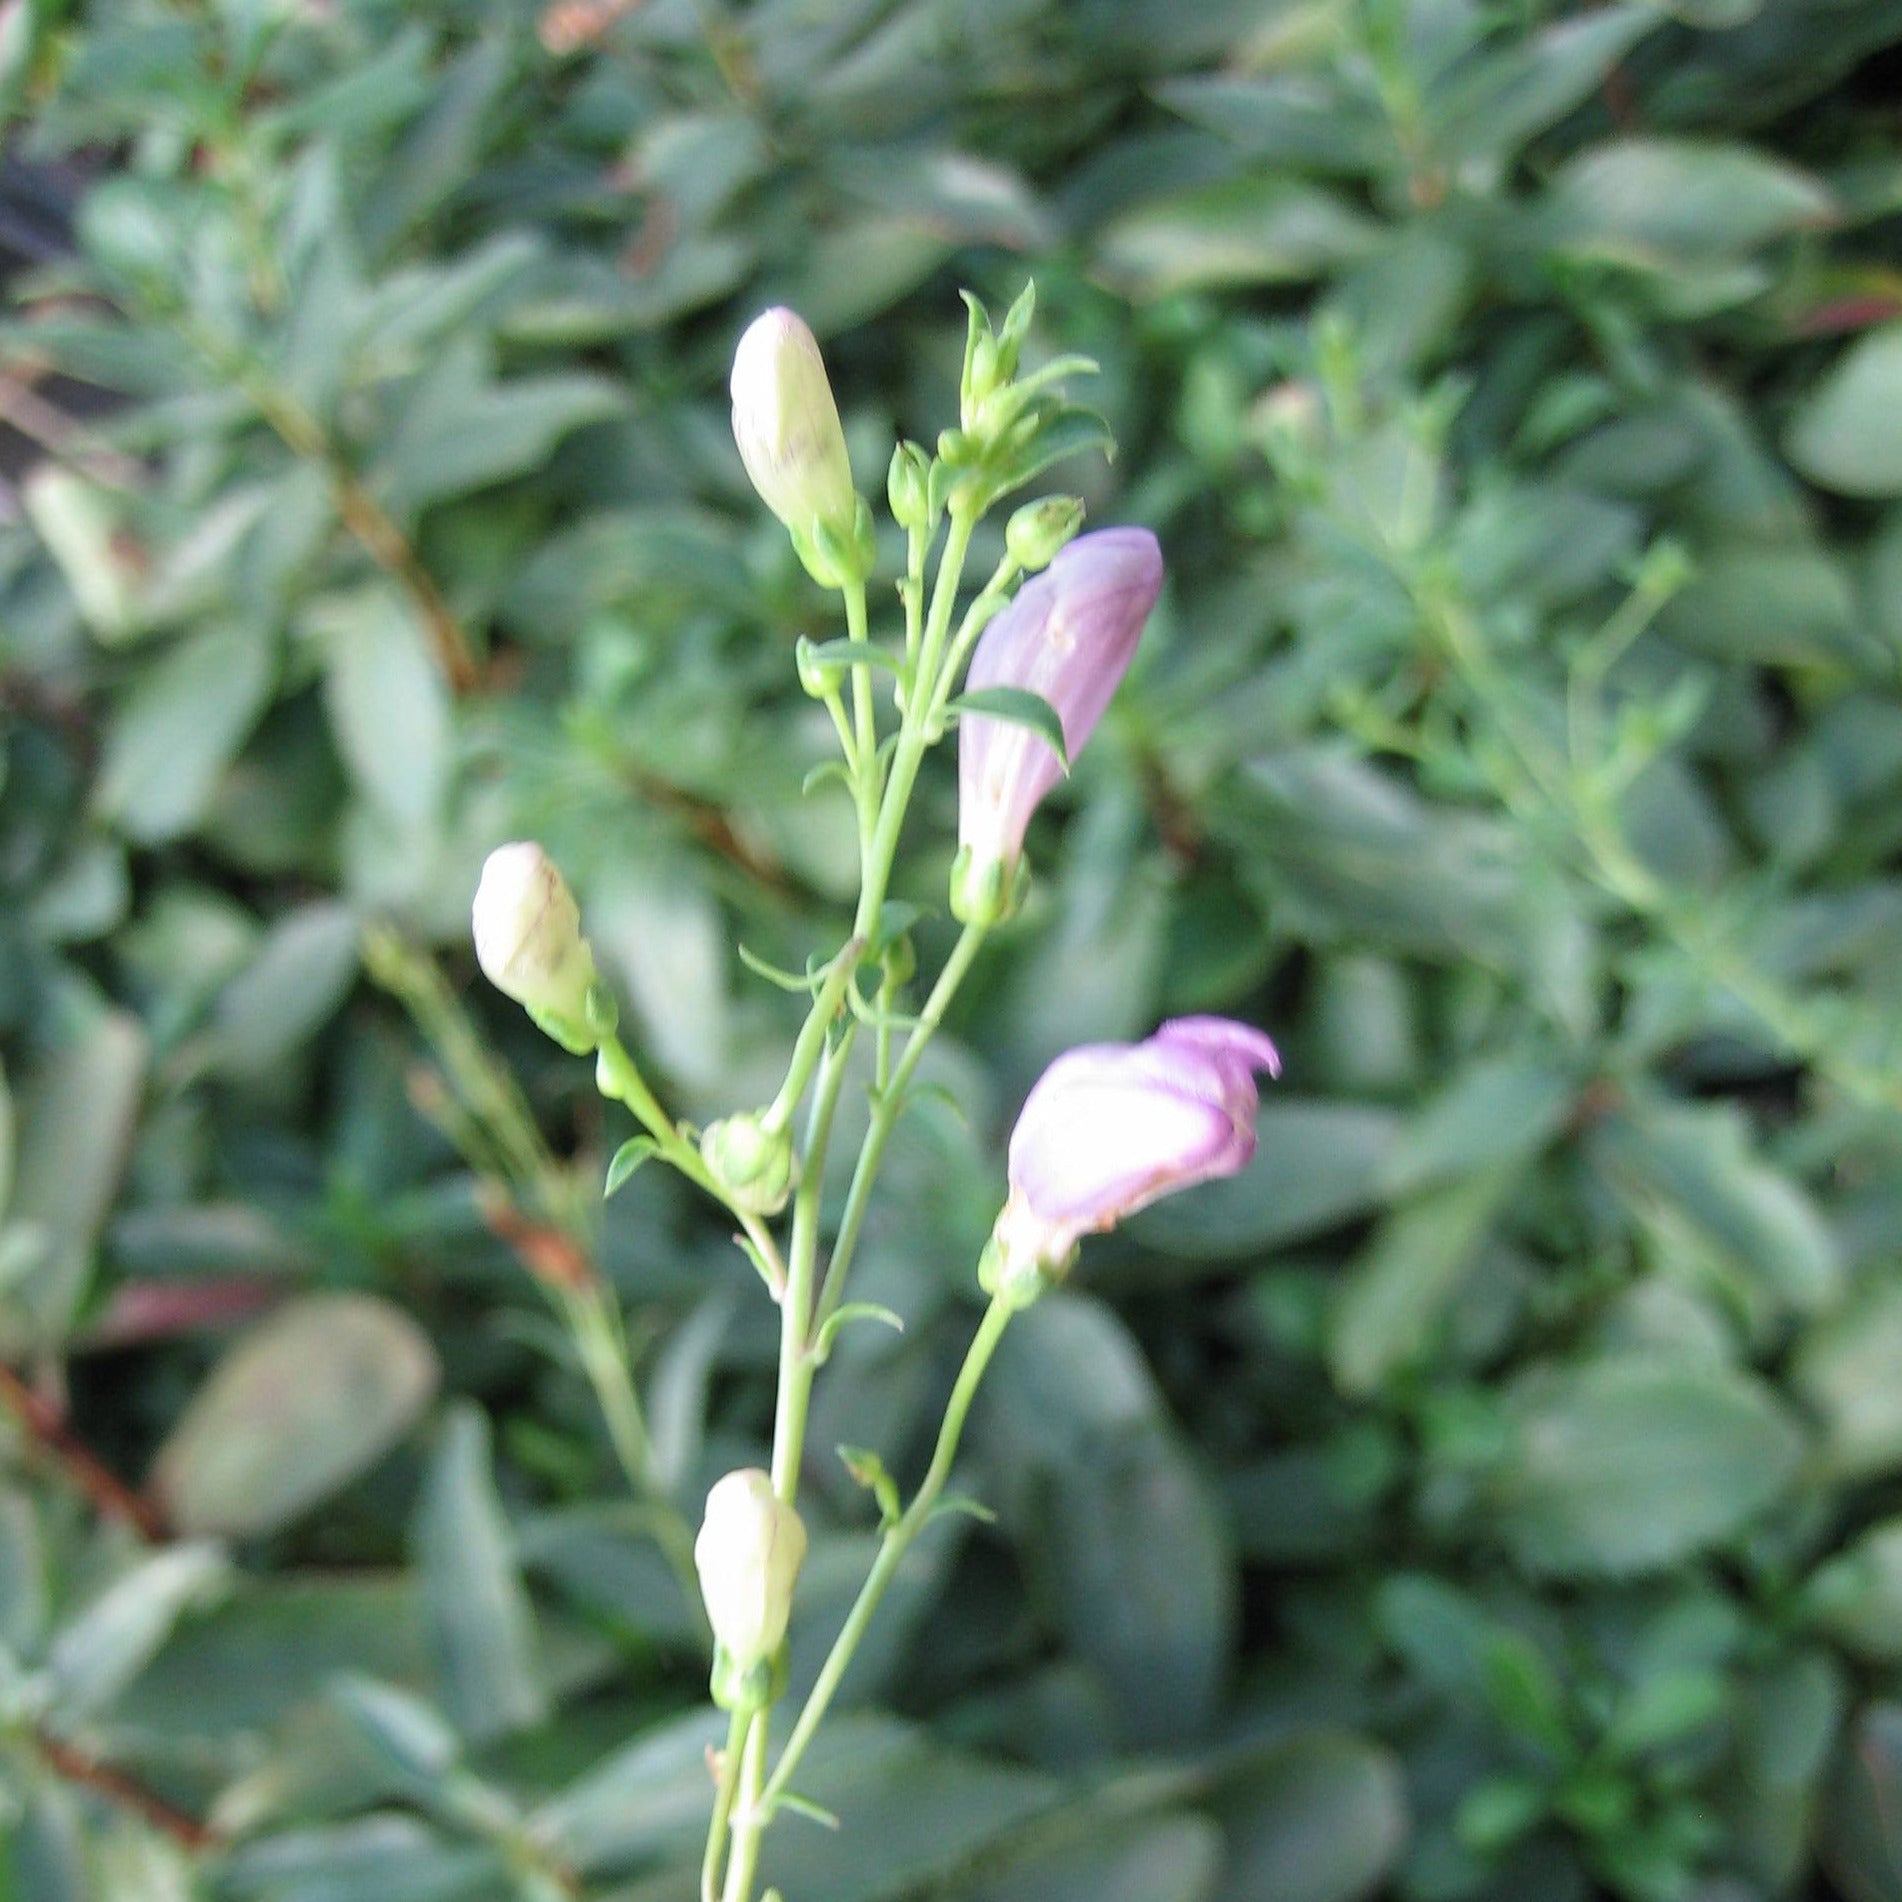 Purple and white, bud-like blooms on small branches emanating from a single green stalk. There are many darker green leaves in the background.